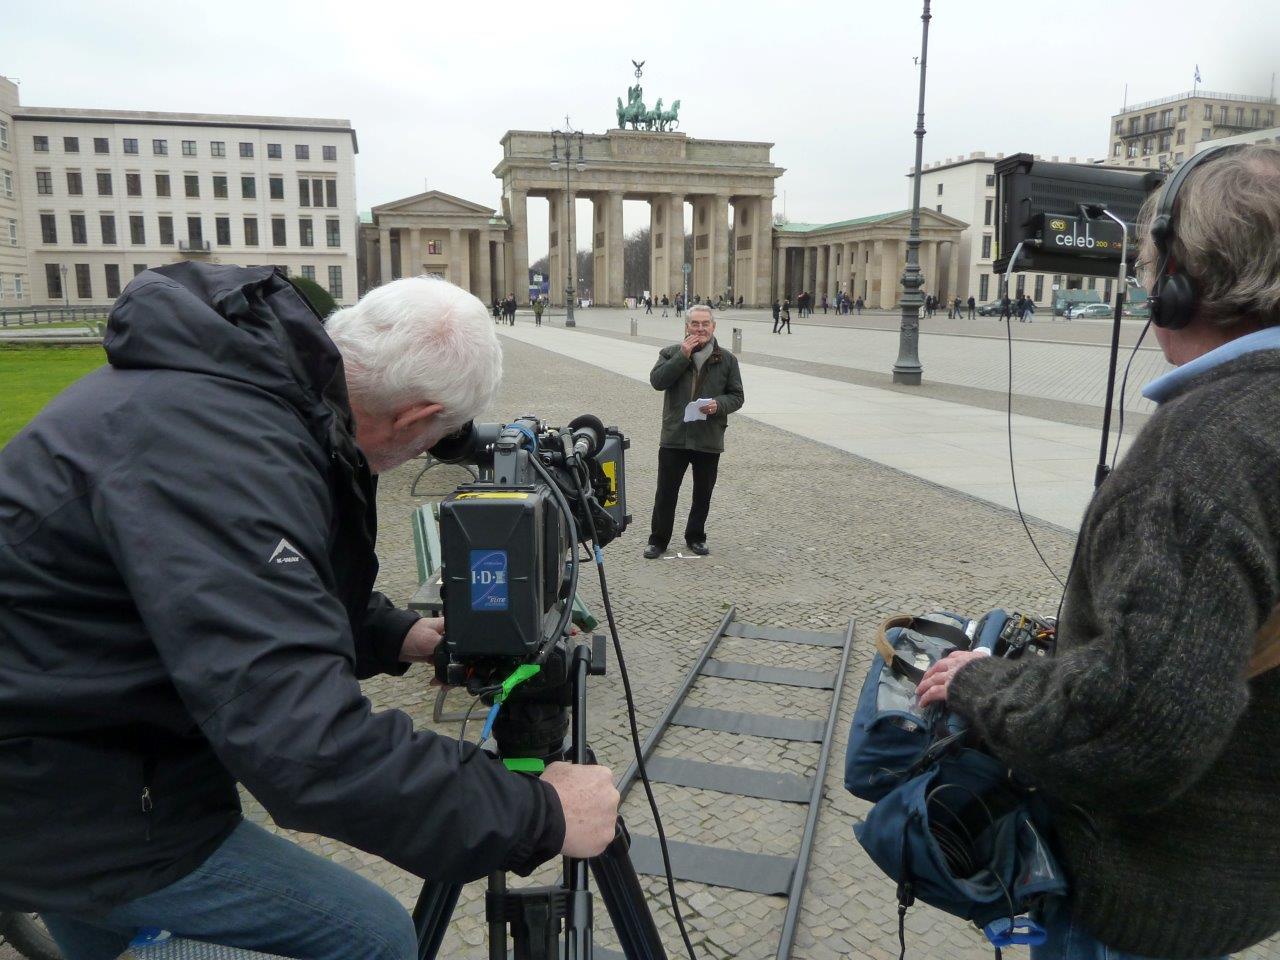 Tomi Reichental being interviewed at Berlin's famous Brandenburg Gate for the Praxis Pictures documentary "Close to Evil".